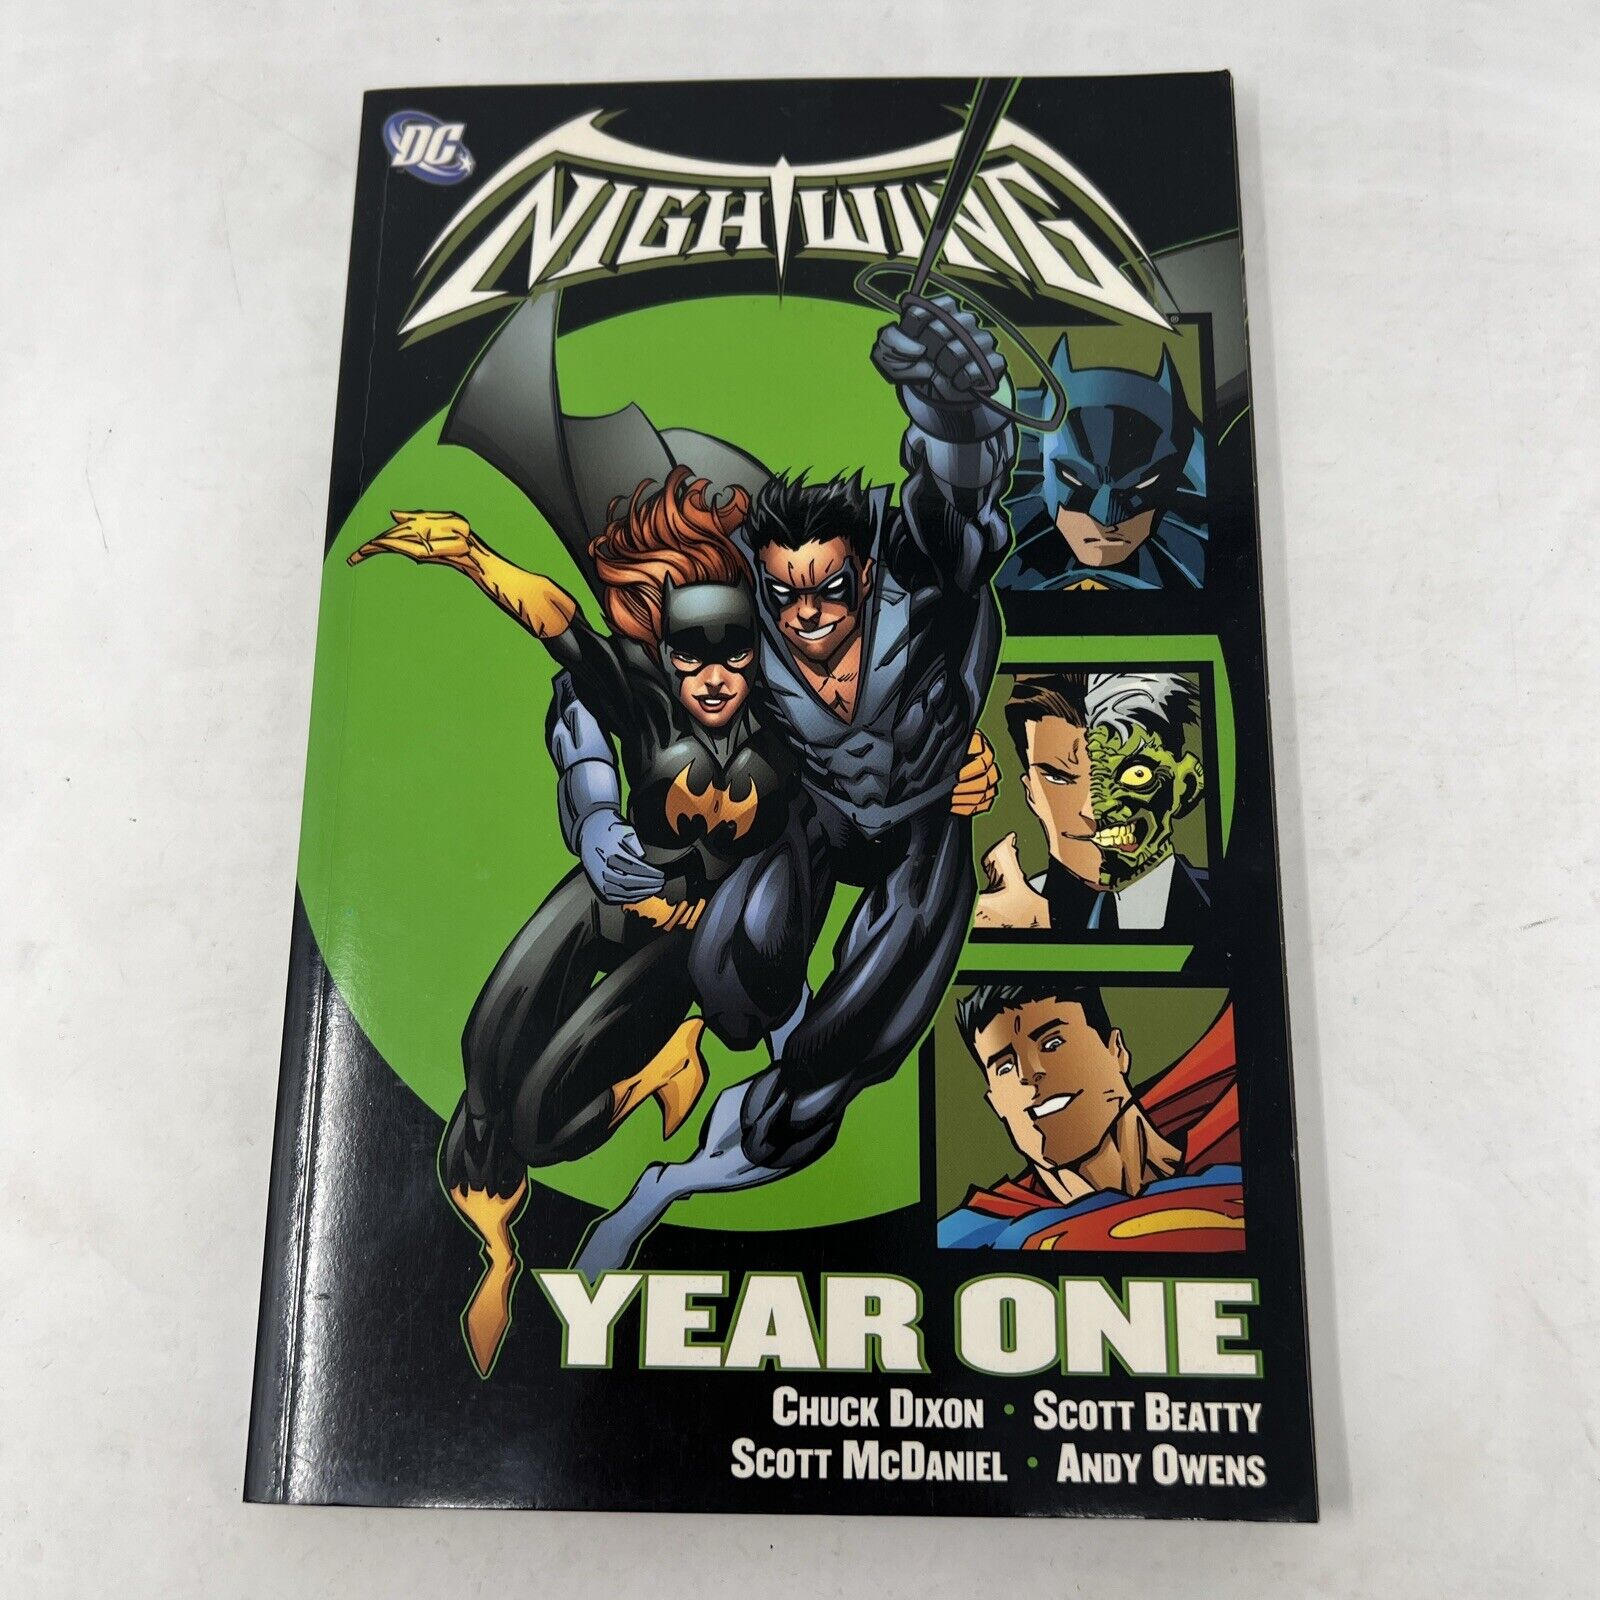 Nightwing Year One First Printing 2005 DC Comics Softcover Comic Graphic Novel